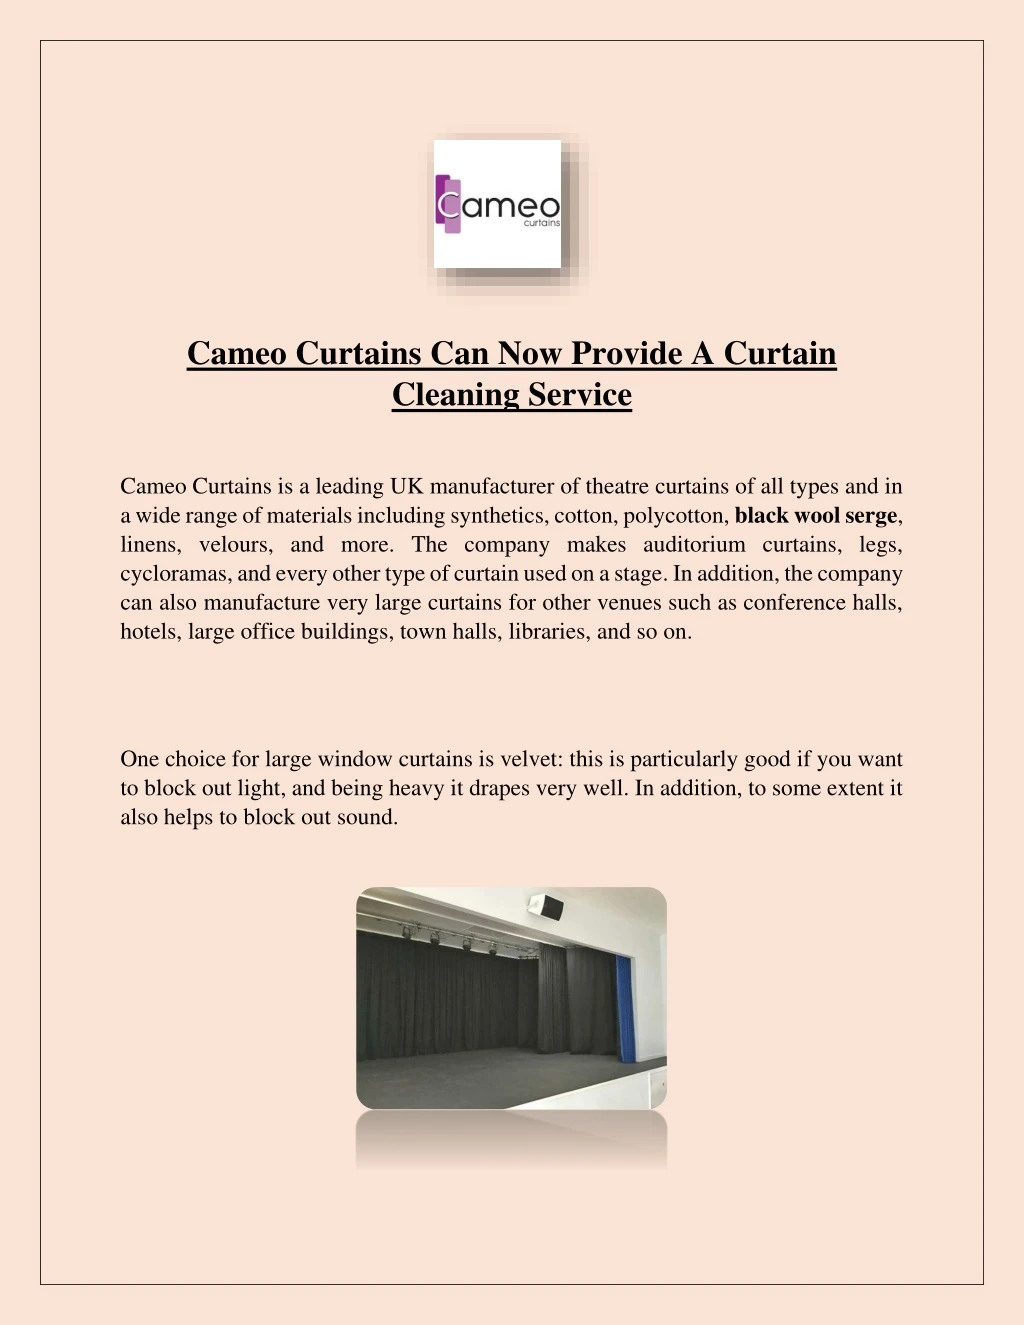 cameo curtains can now provide a curtain cleaning